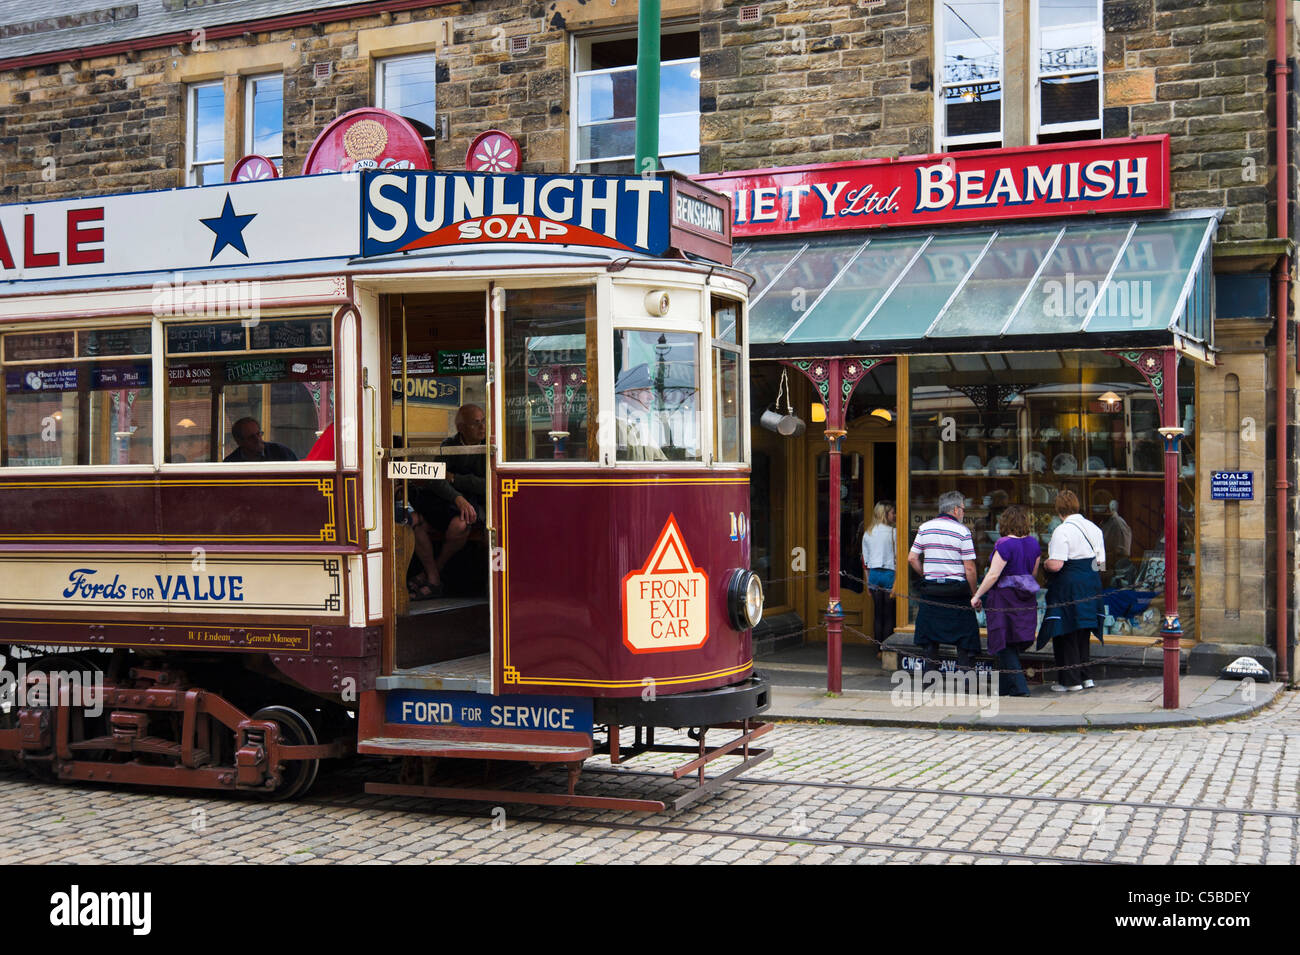 Old tram in front of shops on the High Street in The Town, Beamish Open Air Museum, County Durham, North East England, UK Stock Photo